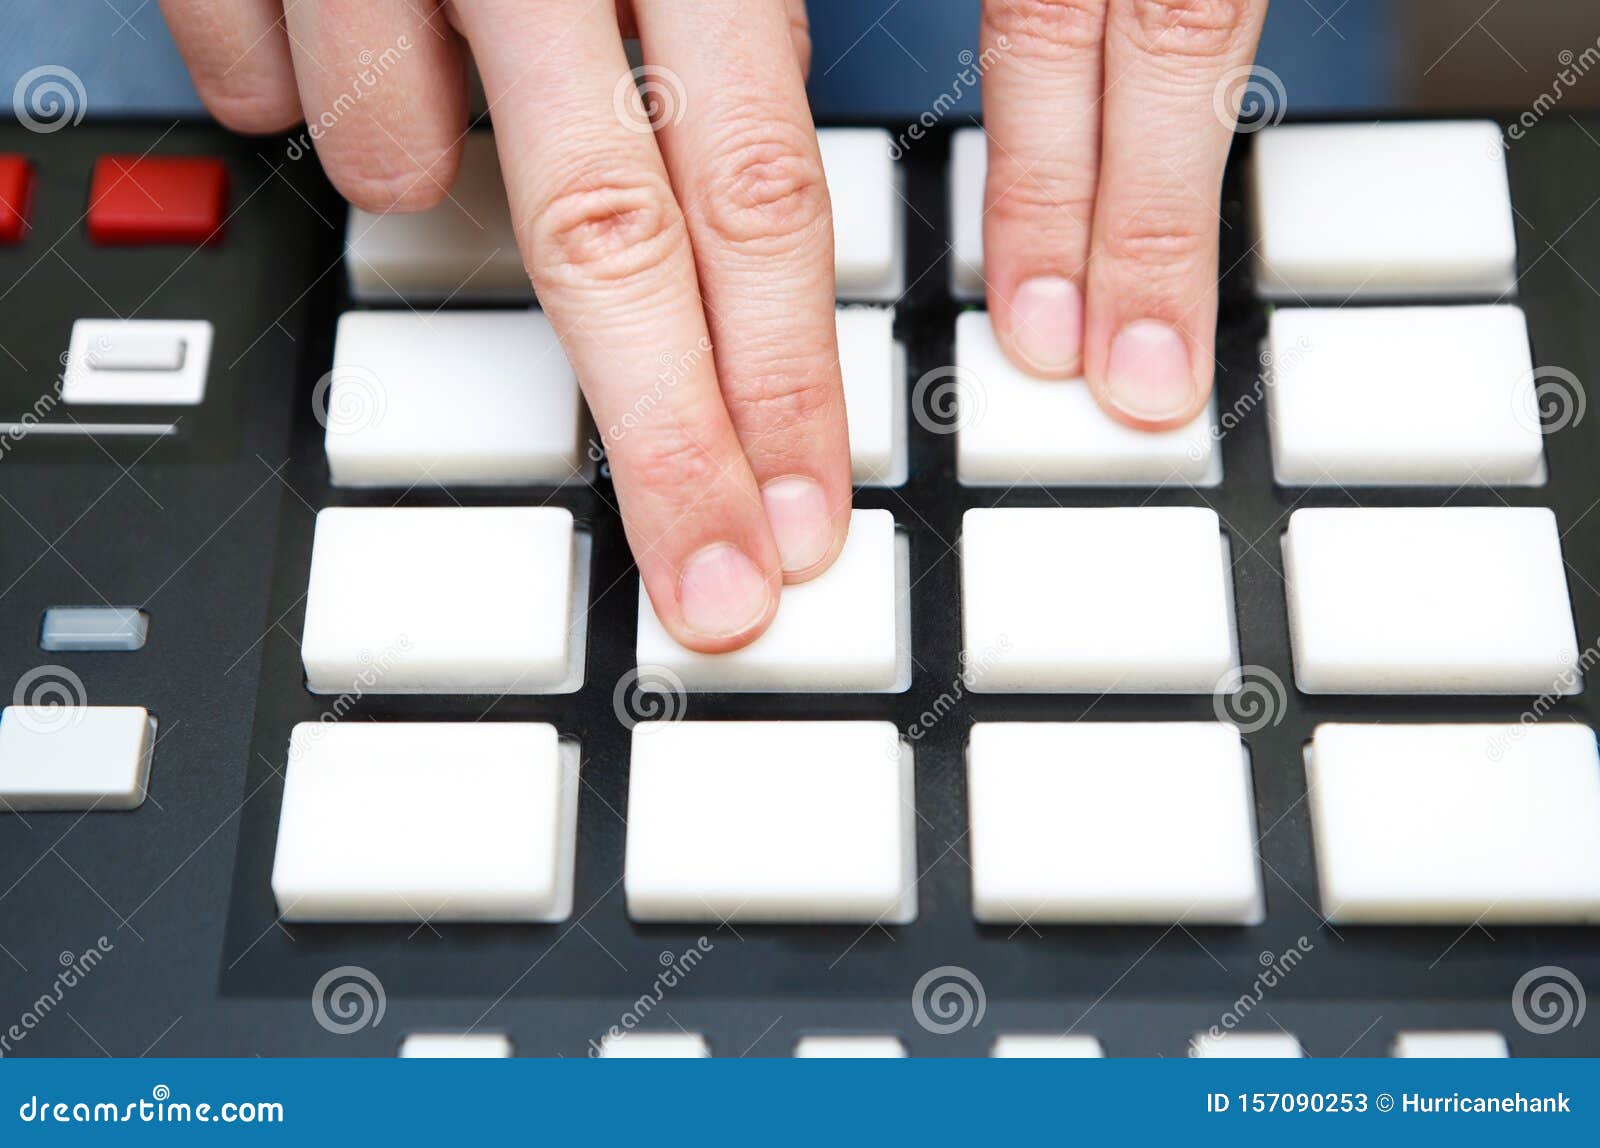 Hip Hop Beat Producing New Beats with Midi Controller Device in Home Studio Stock Image - Image of button,